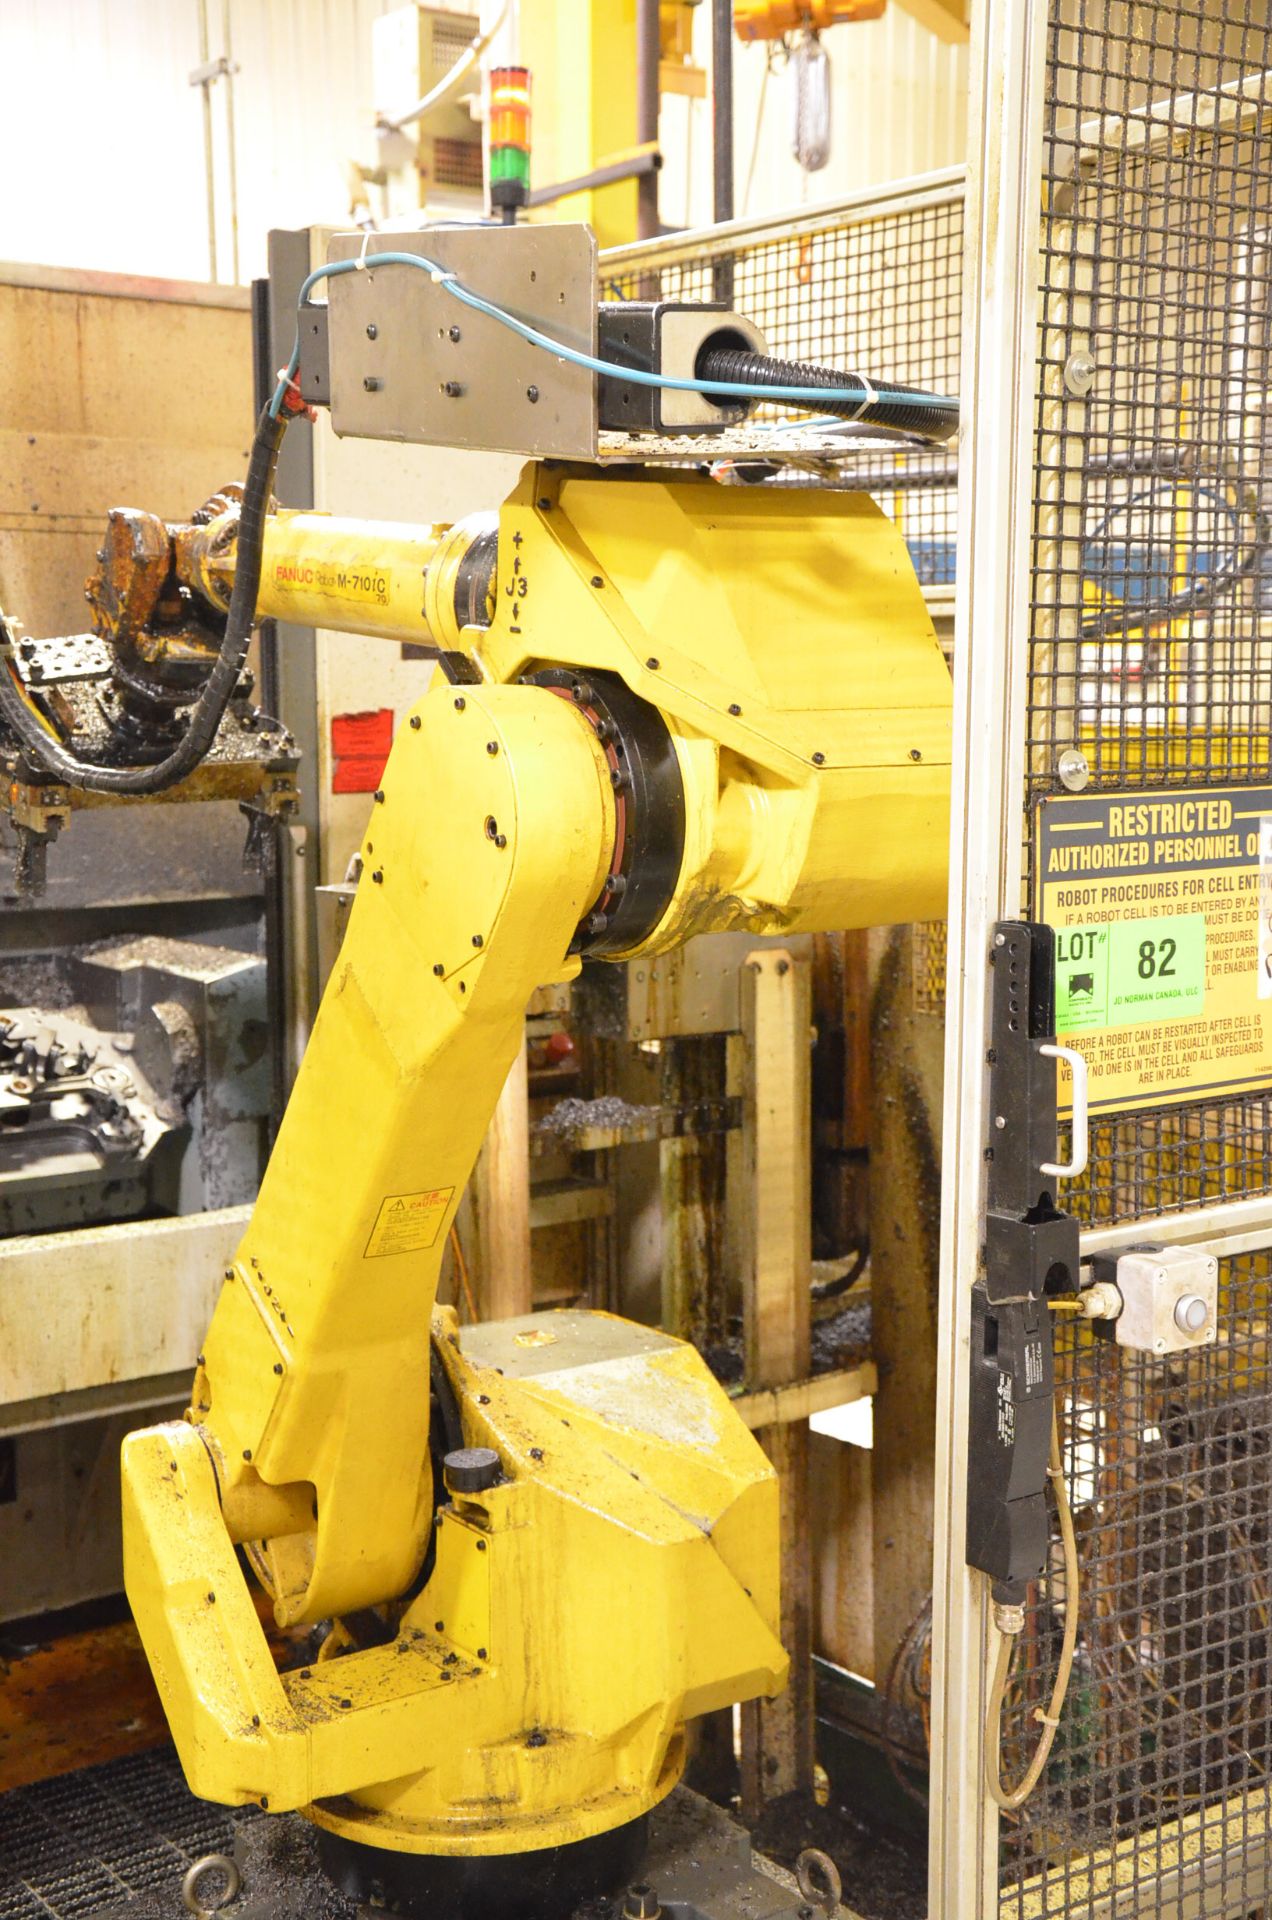 FANUC (2013) M-710IC 6-AXIS PICK AND PLACE ROBOT WITH FANUC SYSTEM R30-IB CONTROLLER, DIGITAL